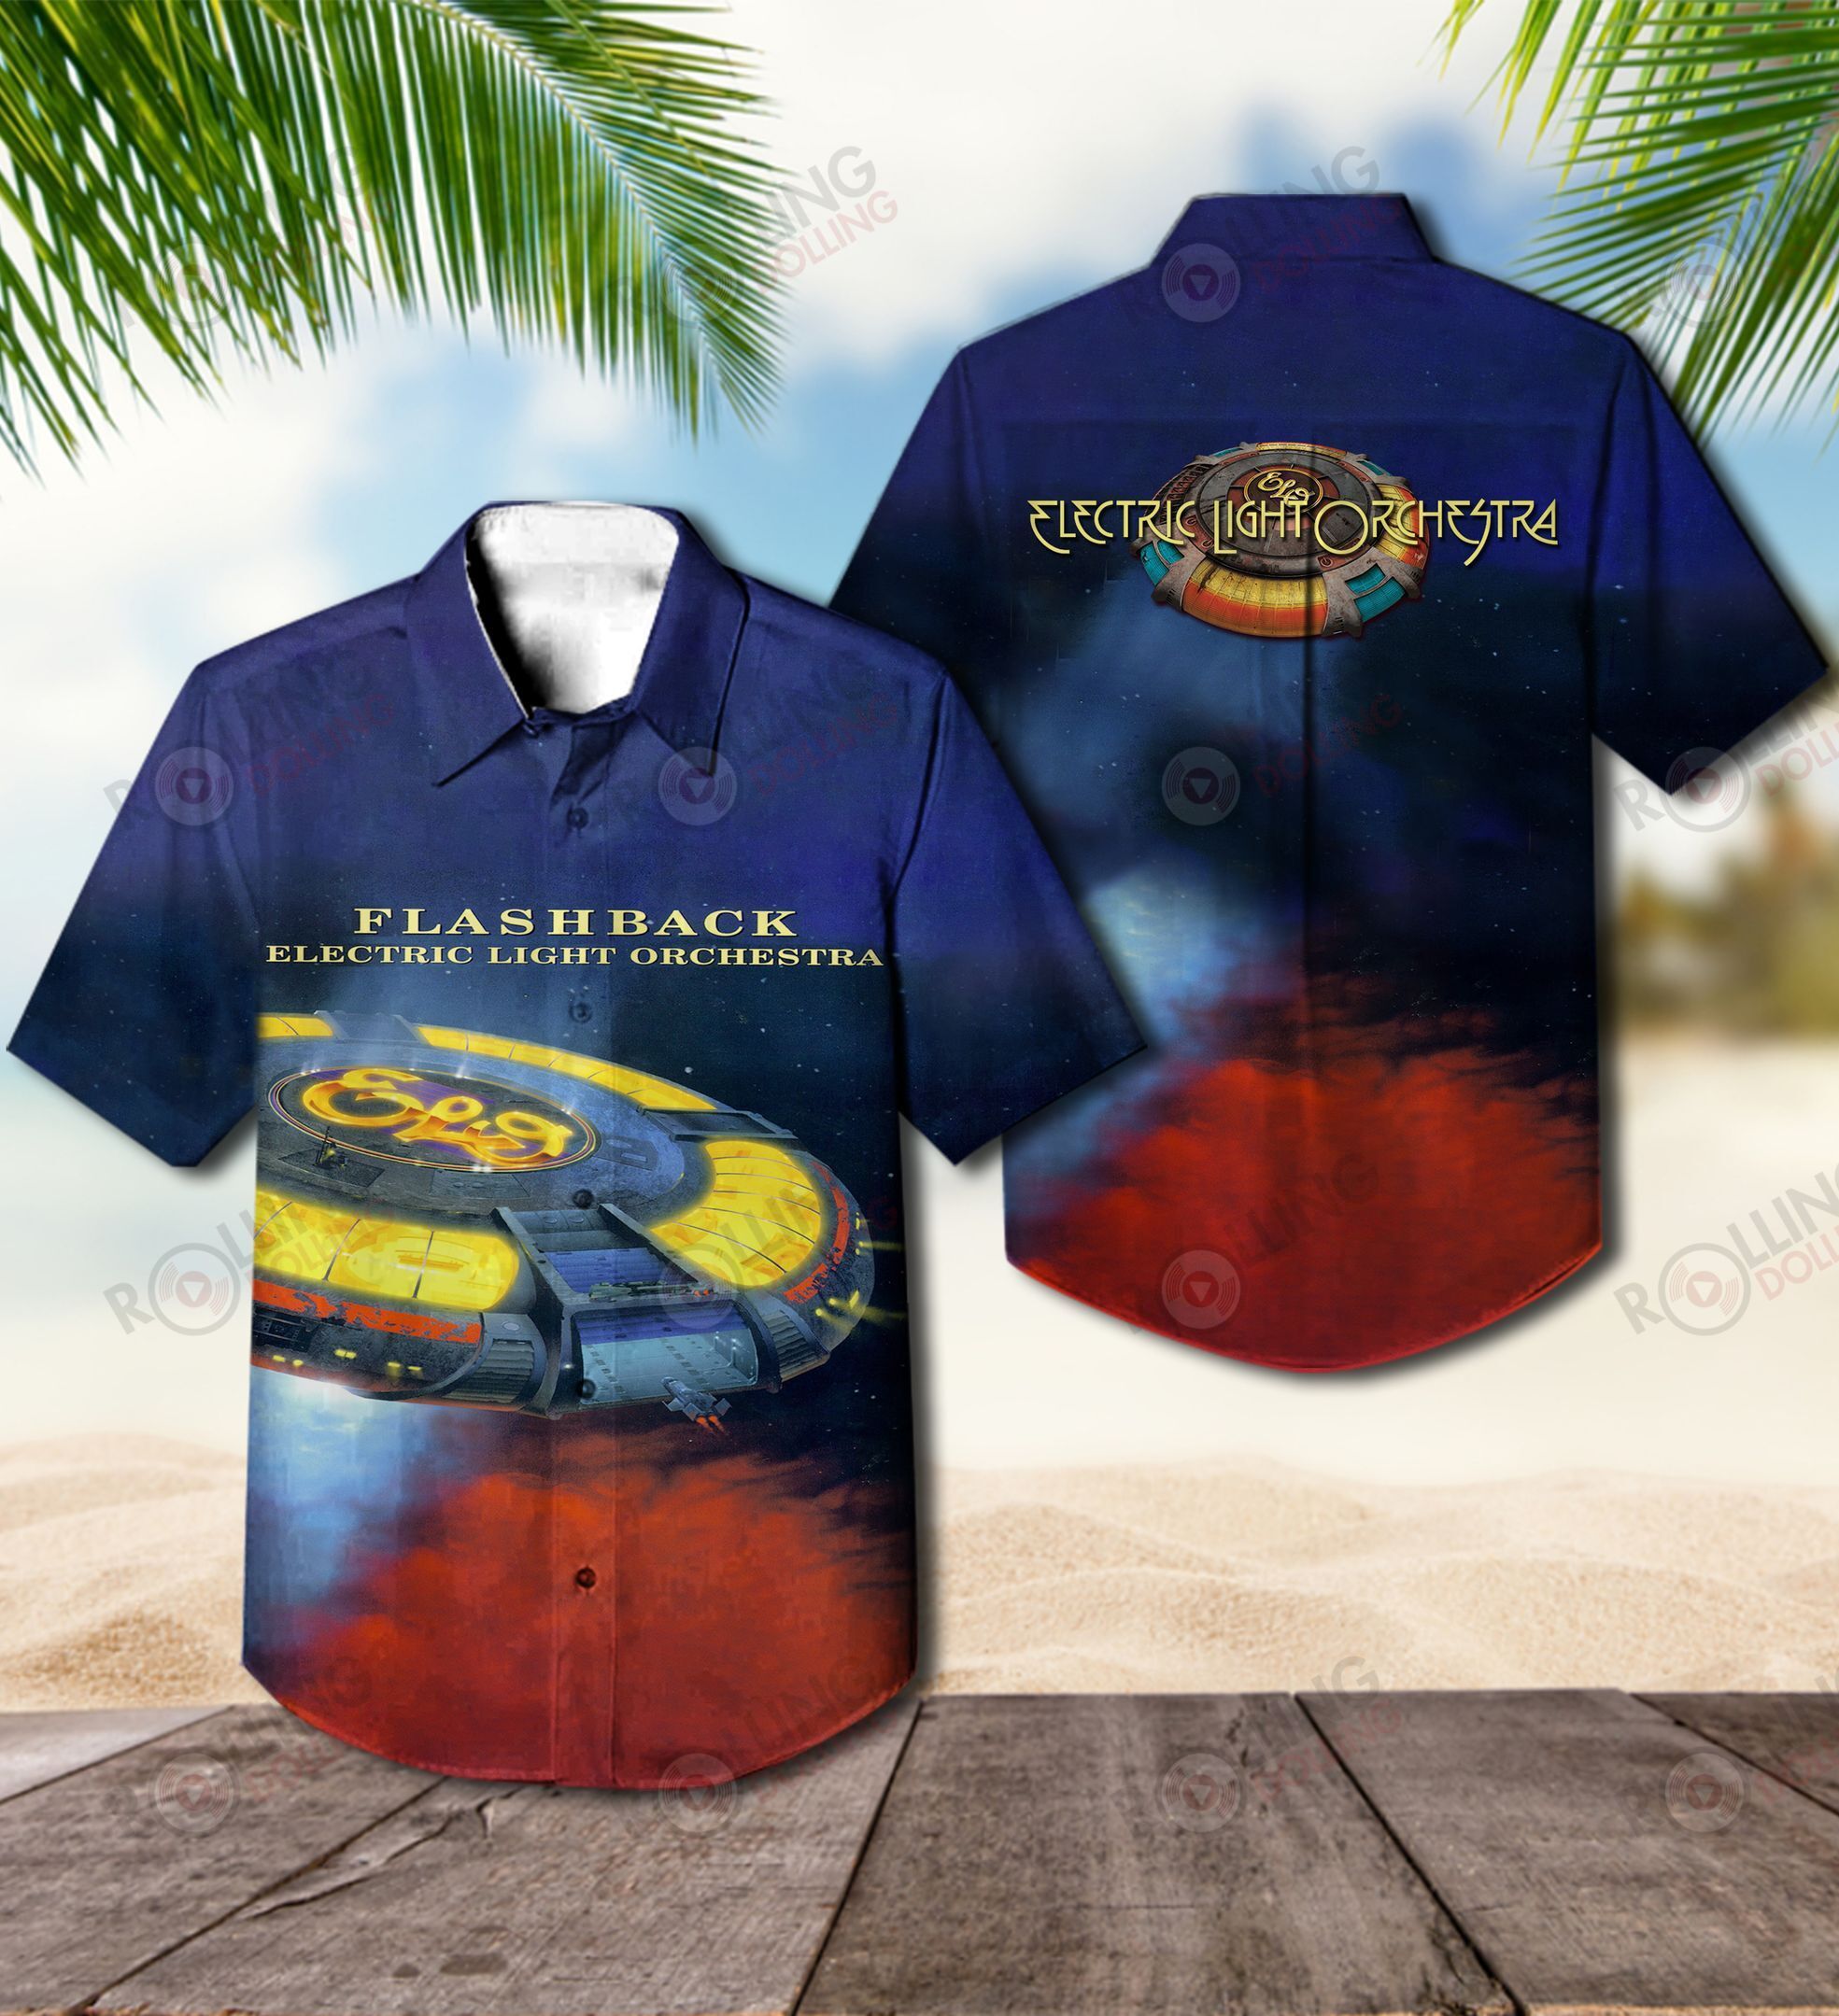 This would make a great gift for any fan who loves Hawaiian Shirt as well as Rock band 125